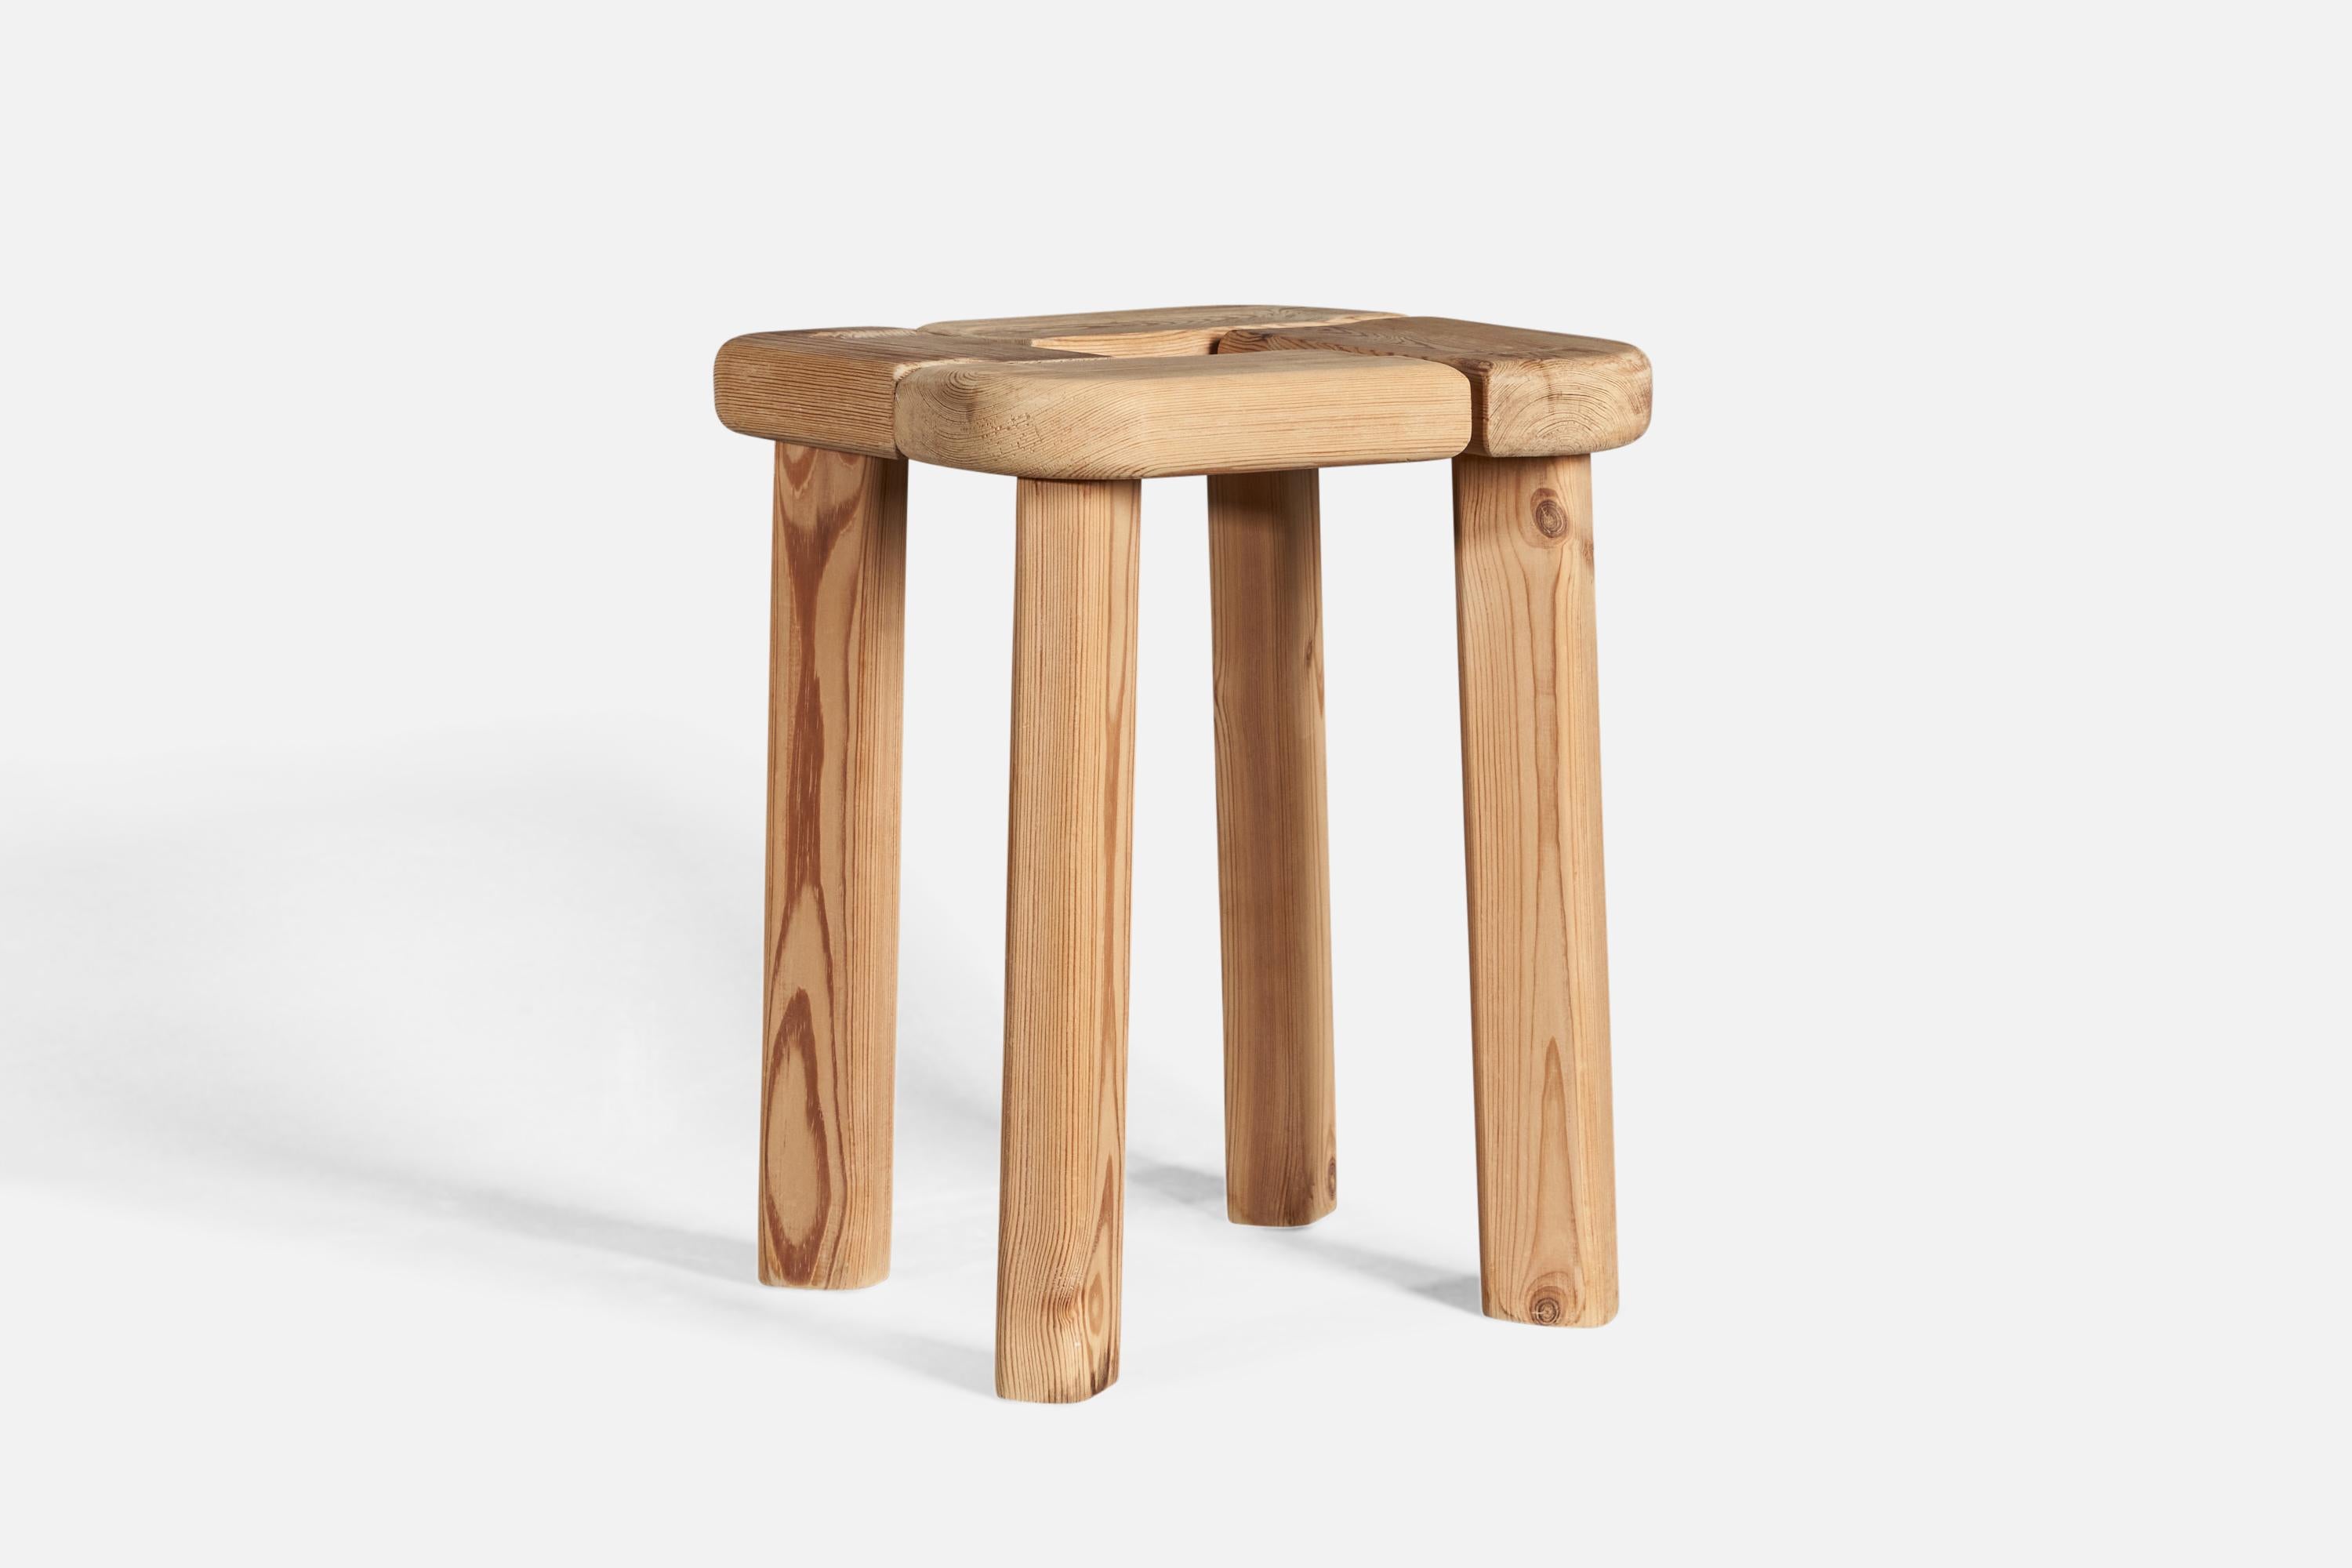 A pine stool designed and produced by Finnsauna, Finland, 1970s.